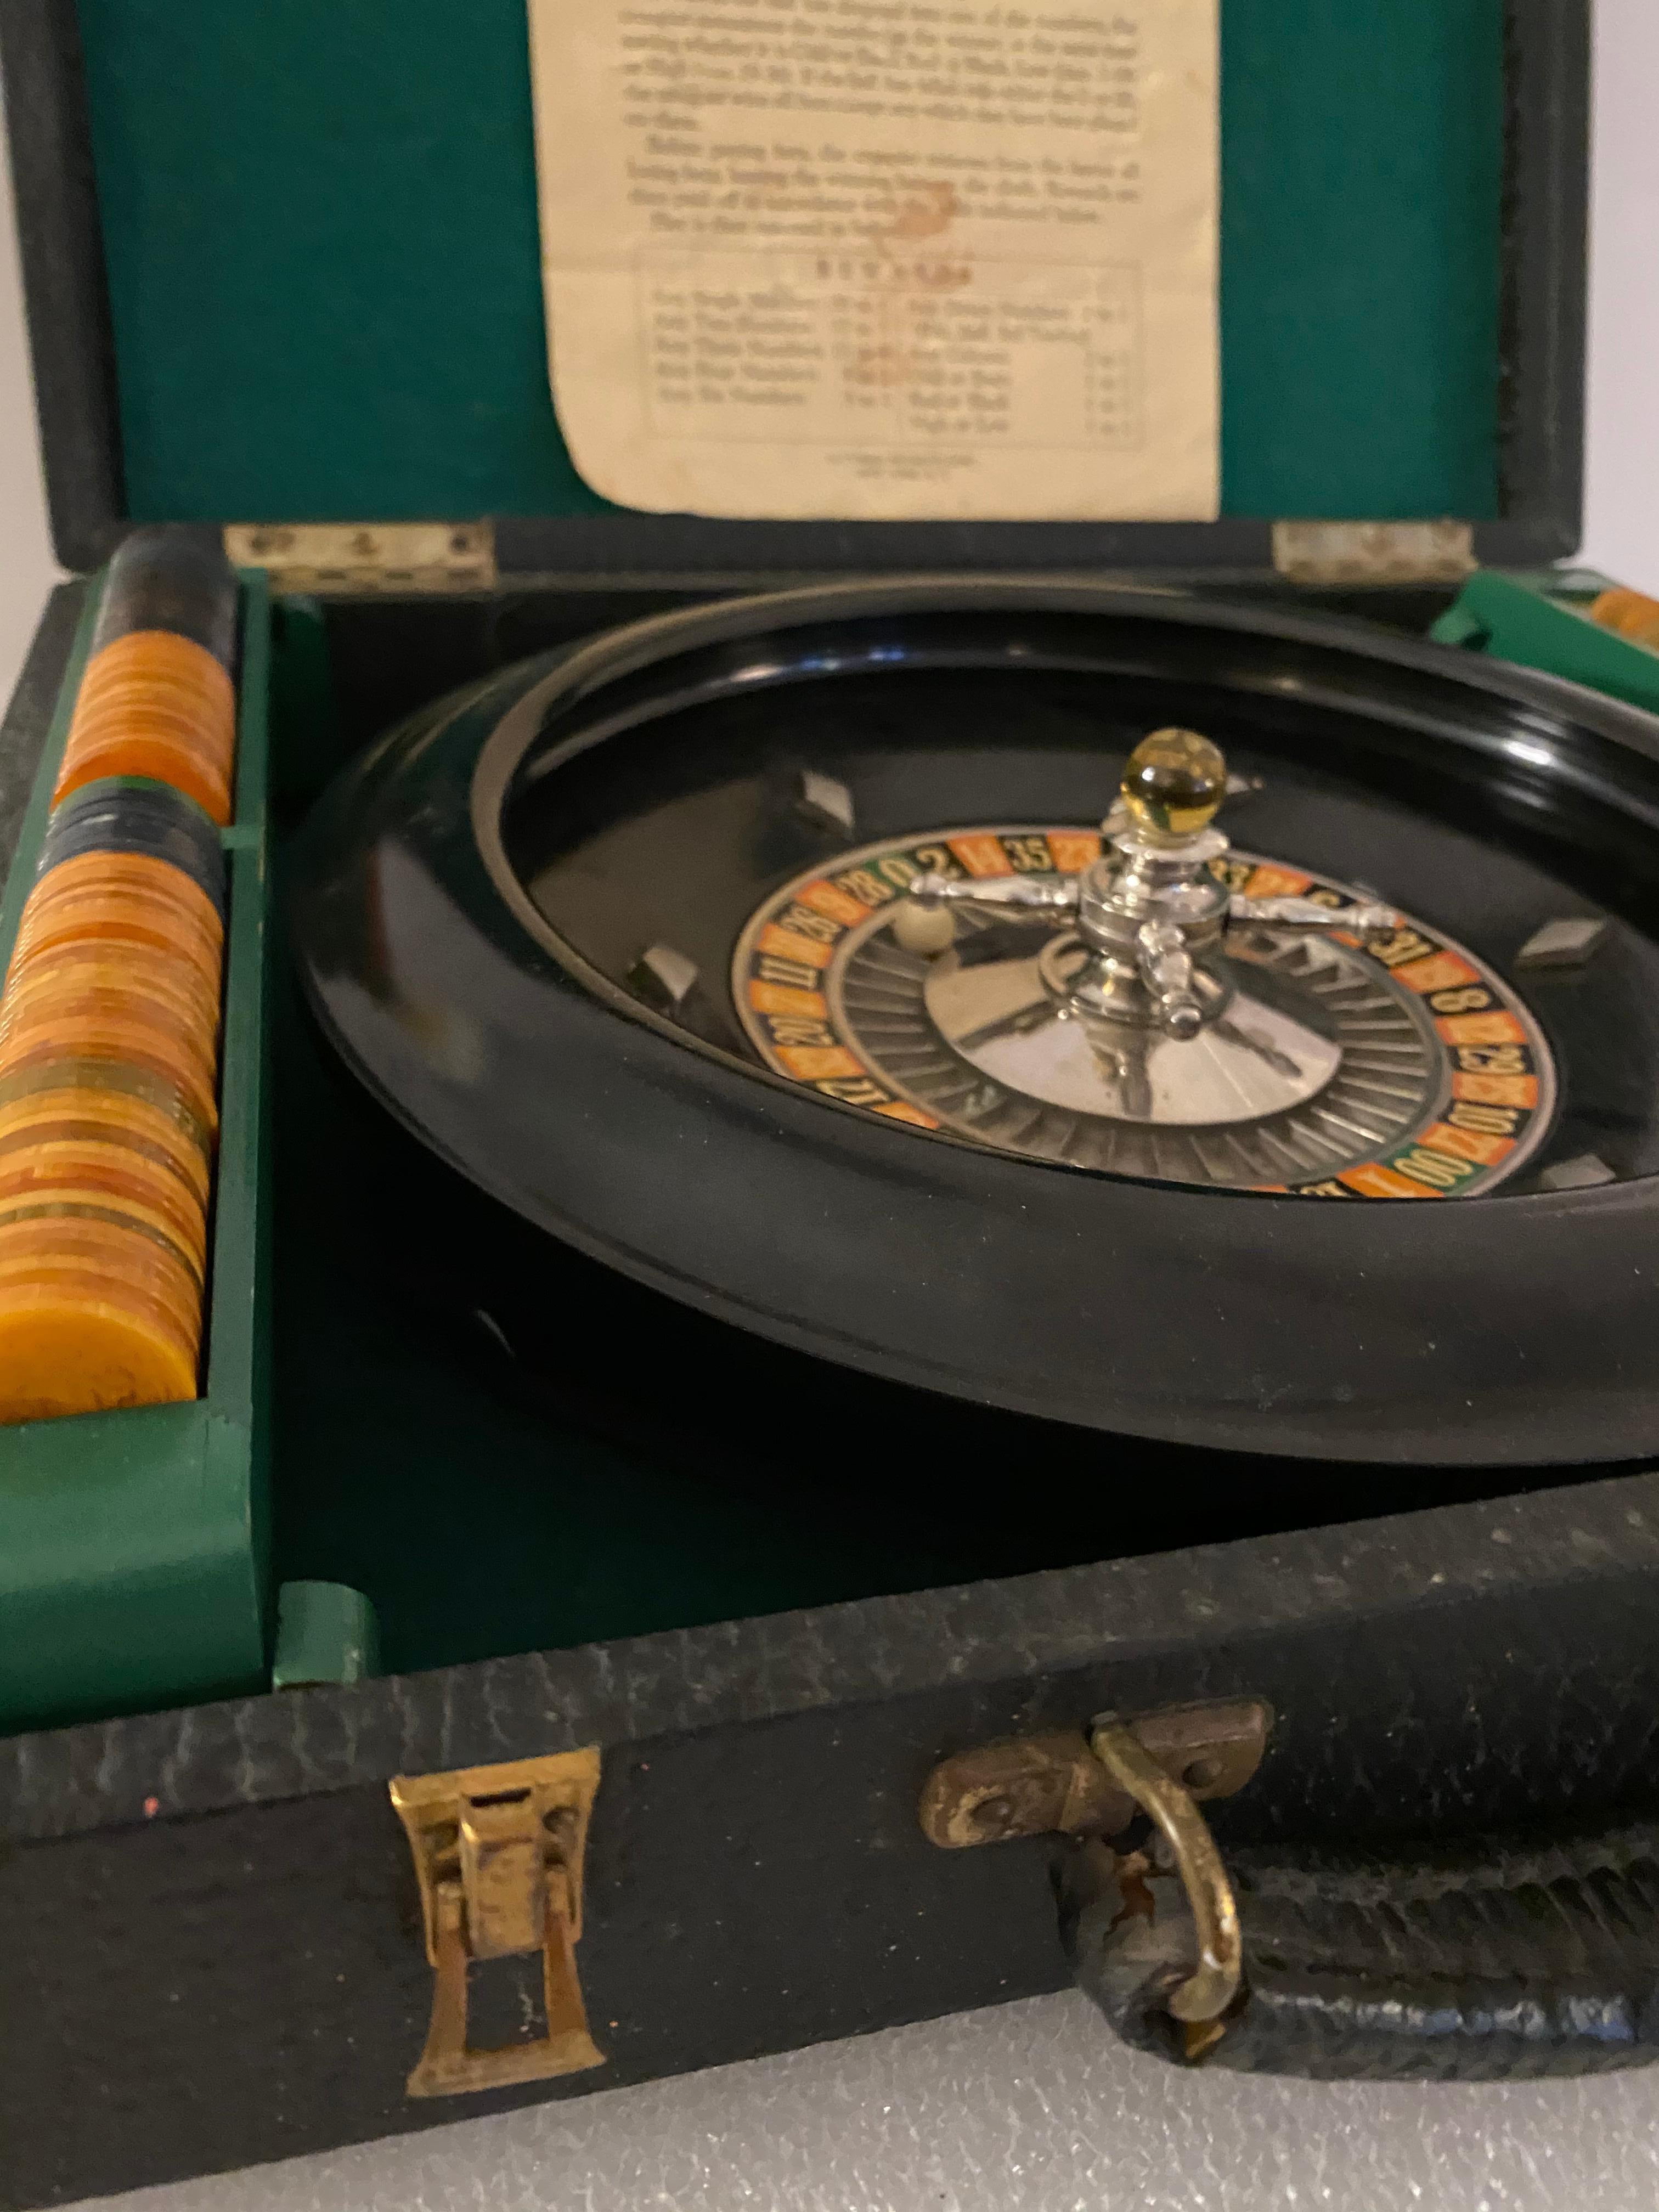 American Mid-Century Modern Roulette Set with Bakelite Handle and Chips in Leather Case